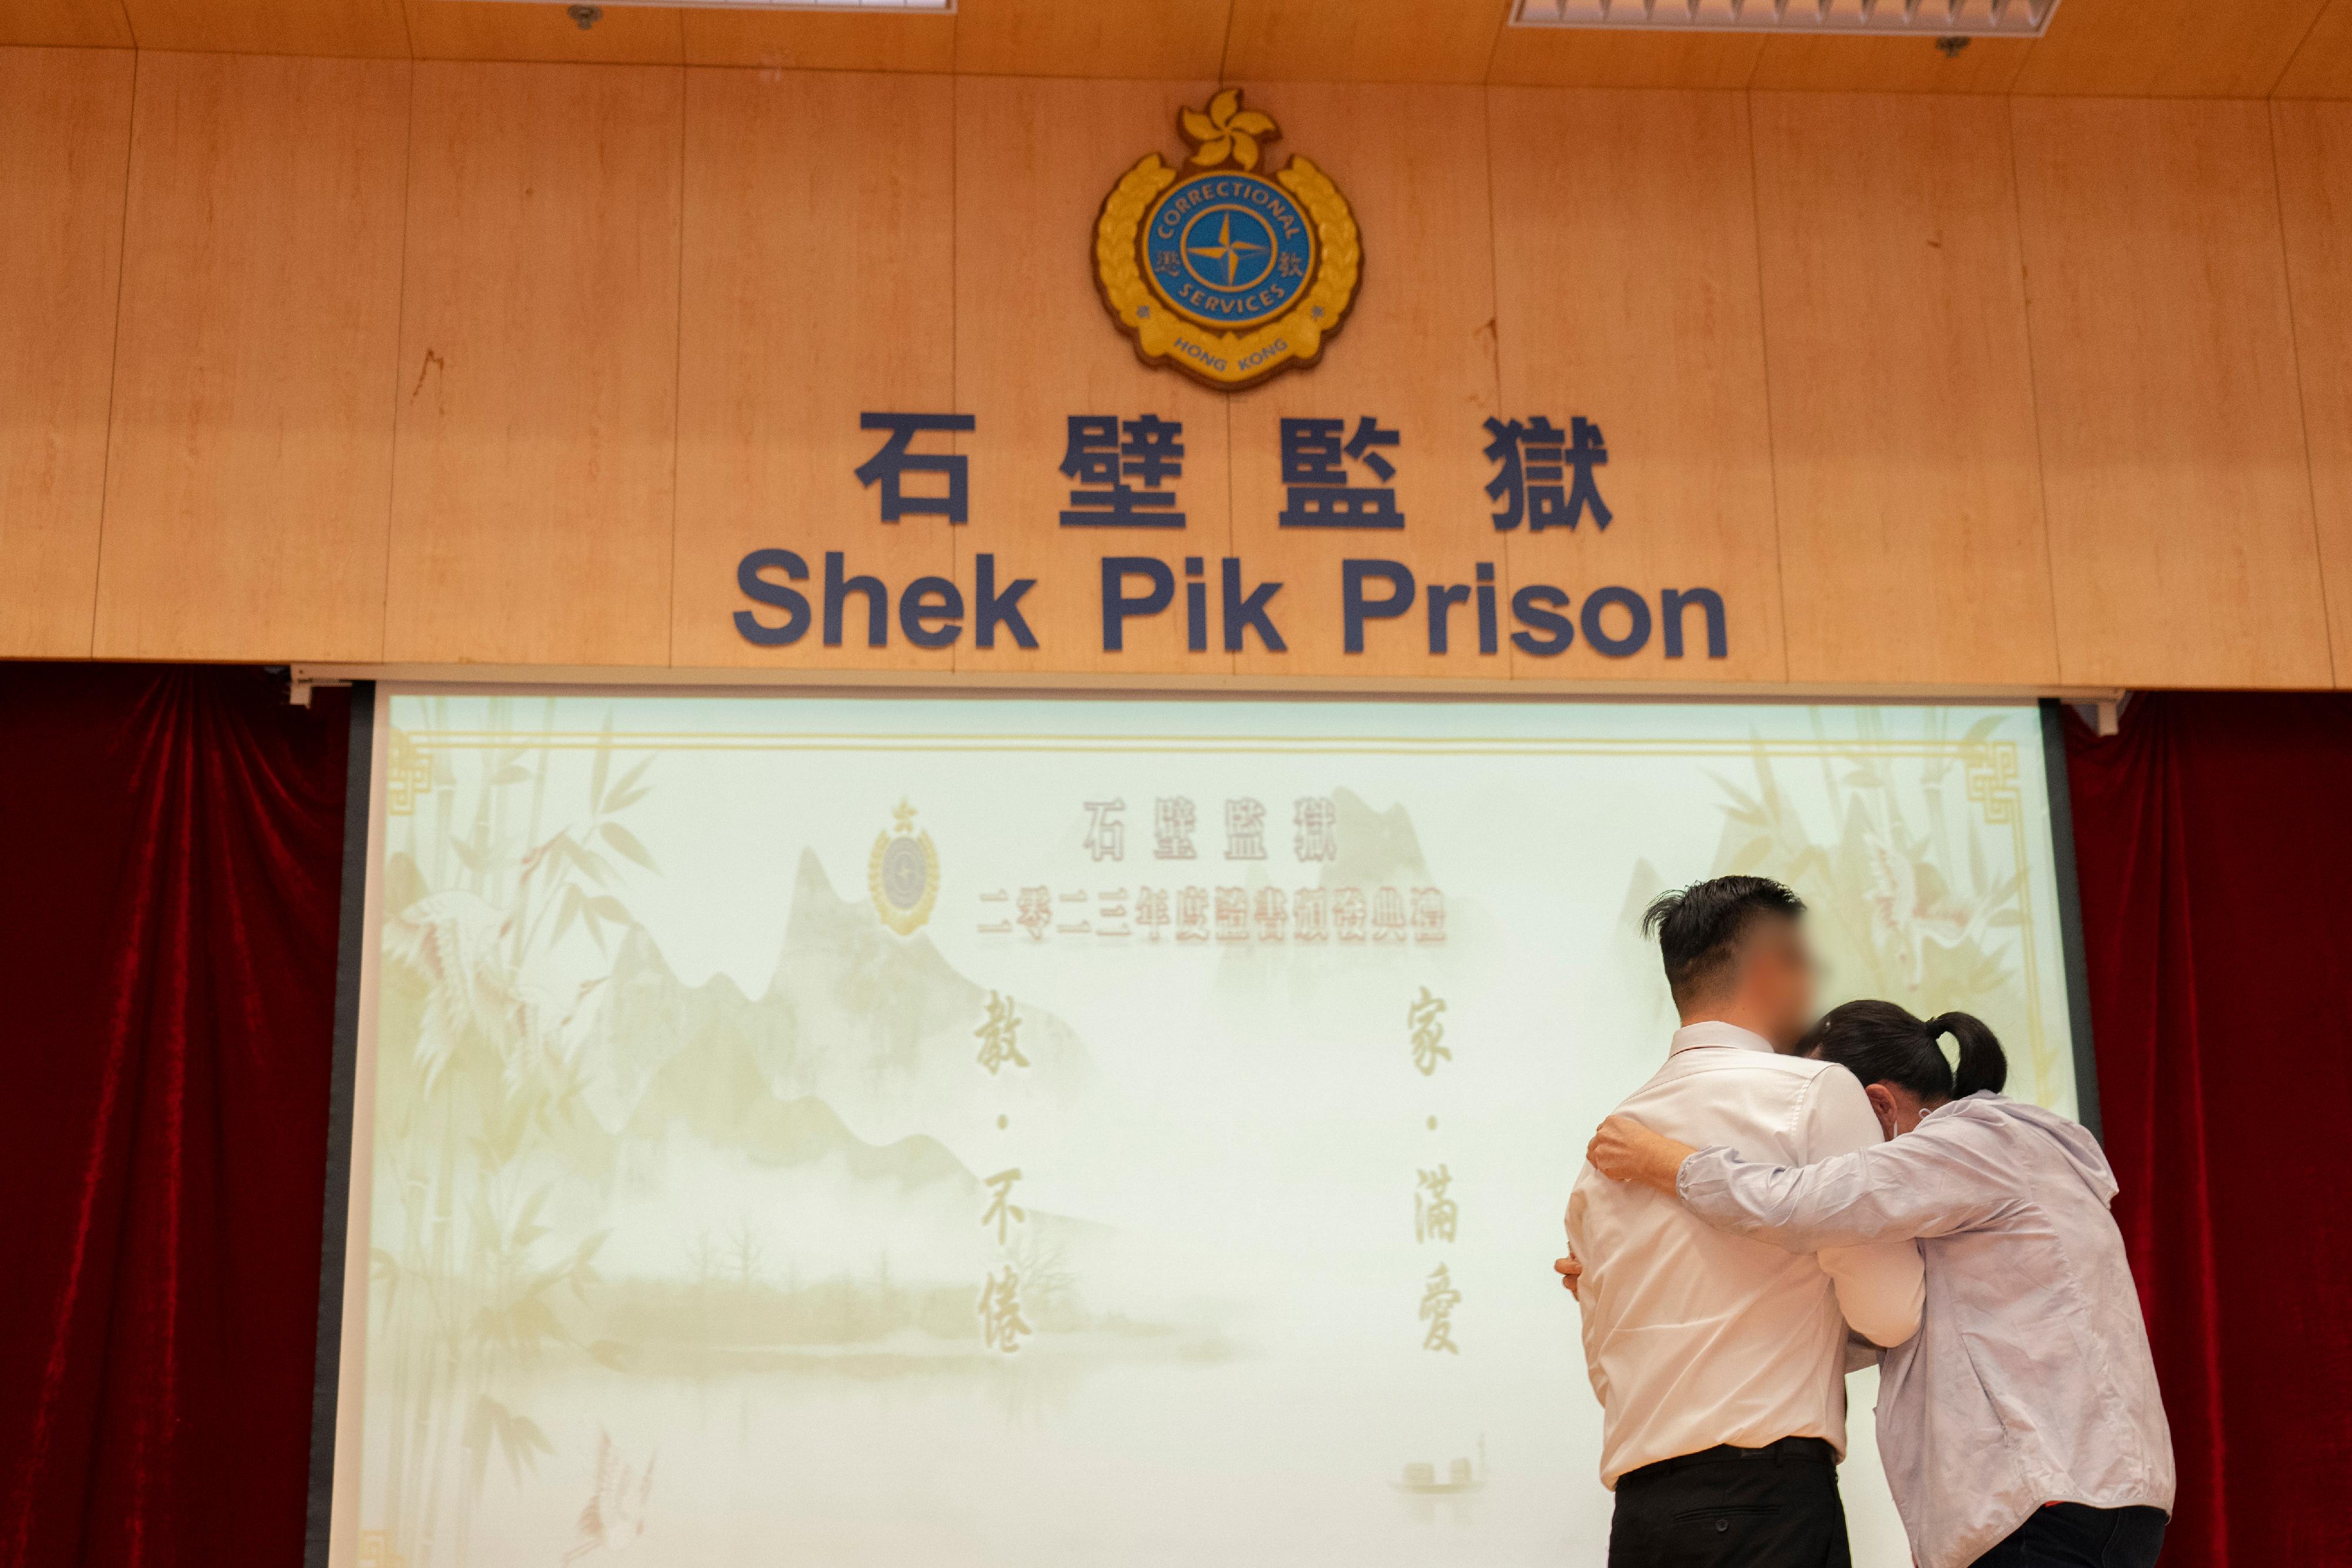 Persons in custody at Shek Pik Prison of the Correctional Services Department were presented with certificates at a ceremony today (November 23) in recognition of their study efforts and academic achievements. Photo shows a person in custody hugging his mother and conveying his gratitude for her support.